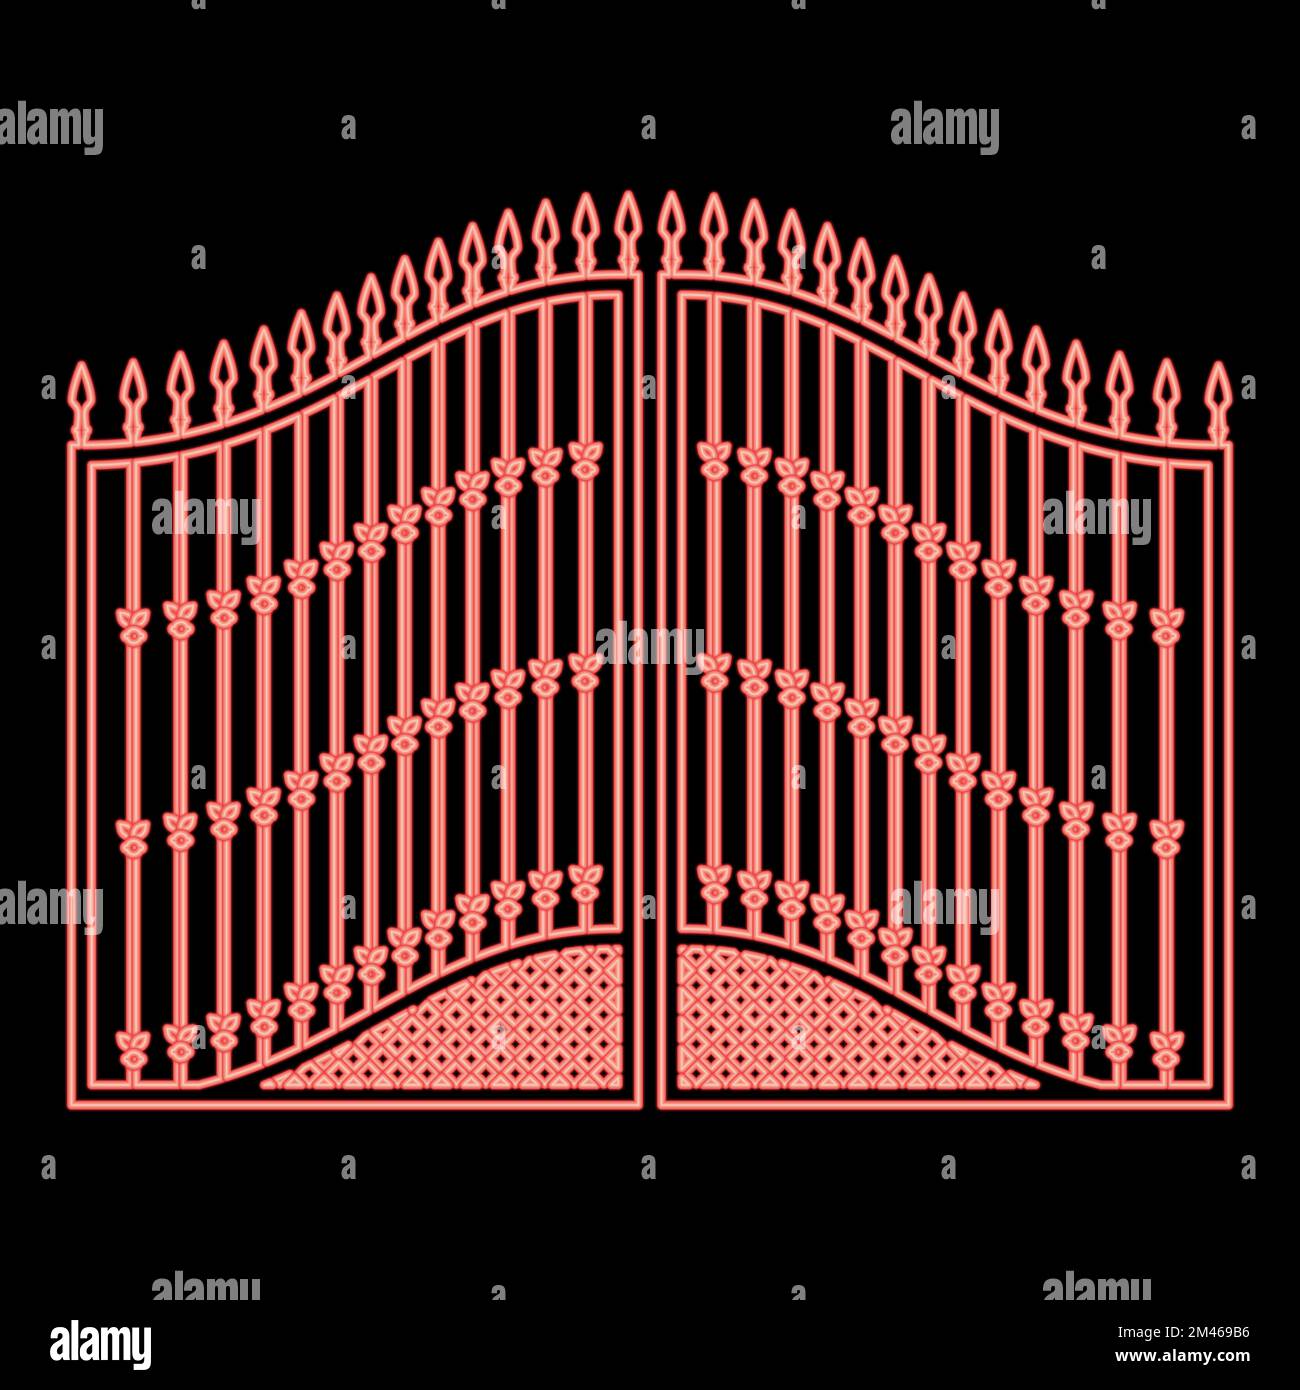 Neon forged gates red color vector illustration image flat style light Stock Vector